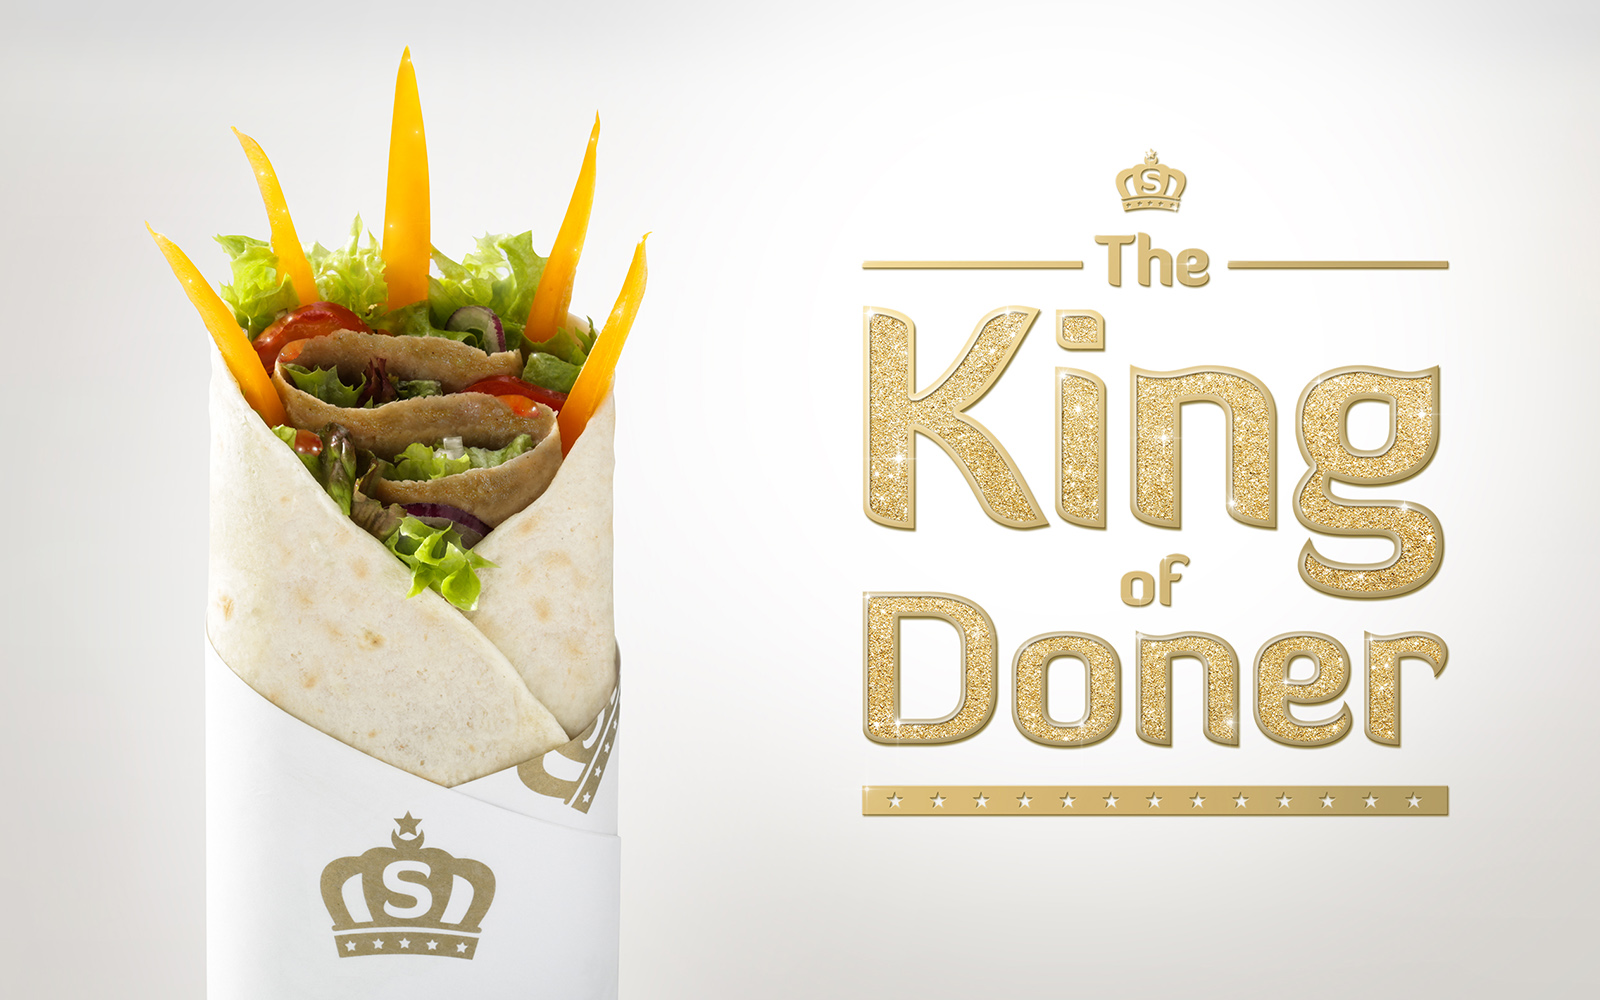 Brand positioning for Sultan, The King of Doner